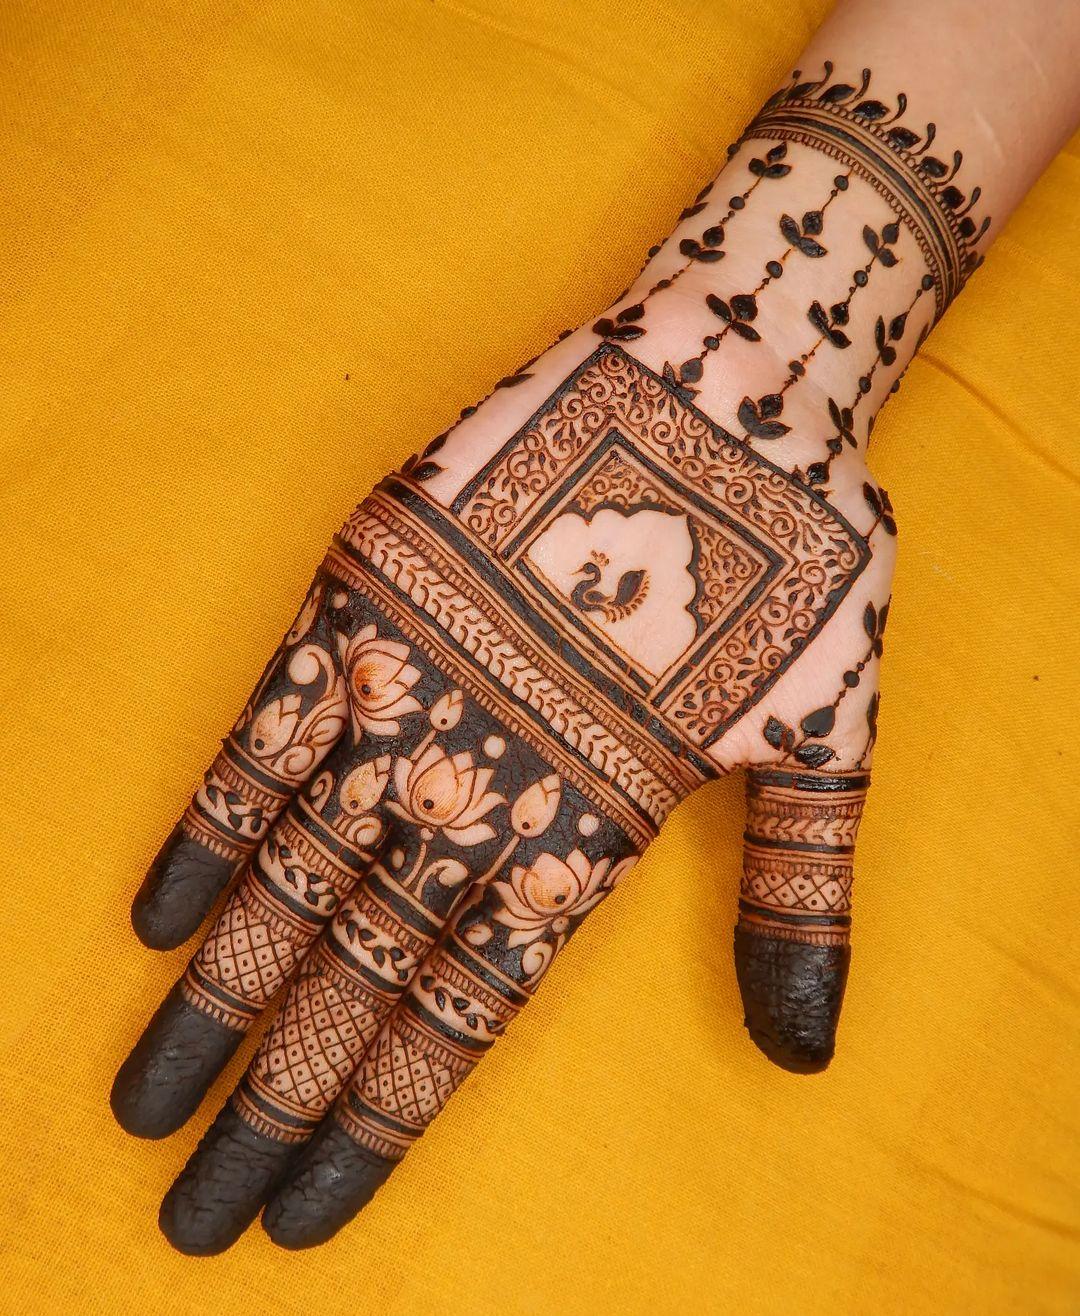 40+ Cool Mehndi Designs That Every 2023 Bride Must Check Out | Bridal Look  | Wedding Blog